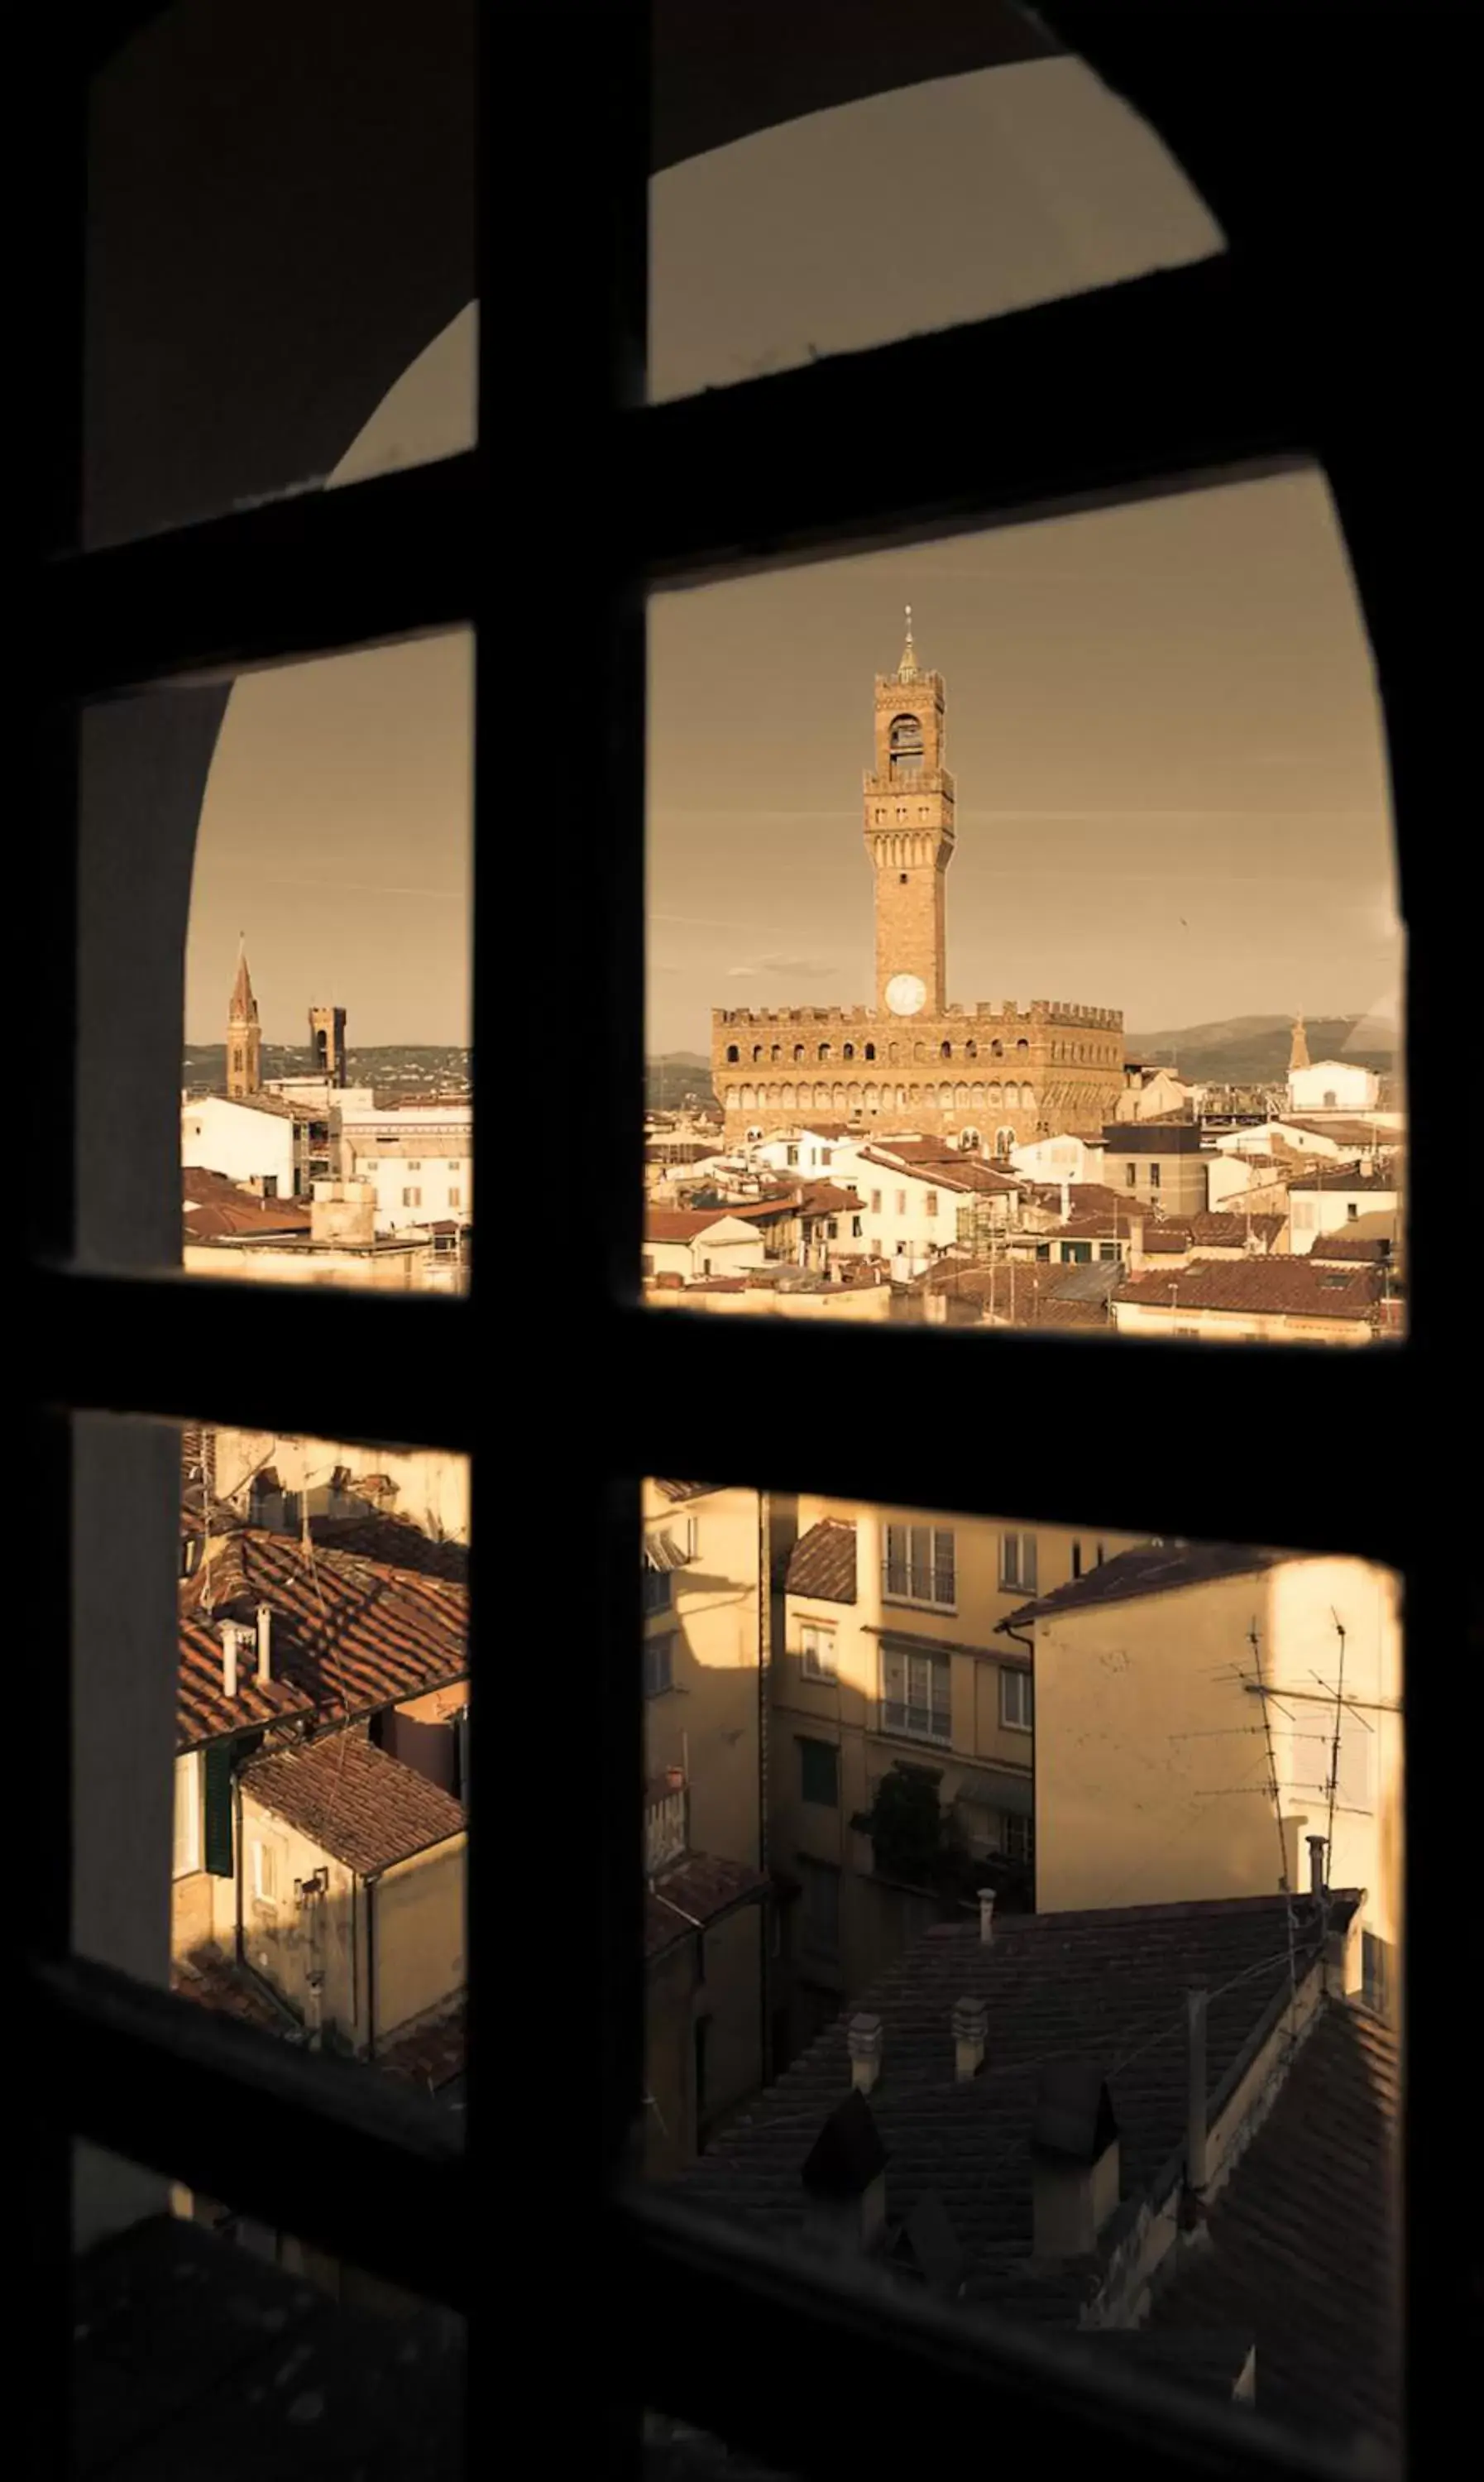 View (from property/room) in Hotel Torre Guelfa Palazzo Acciaiuoli